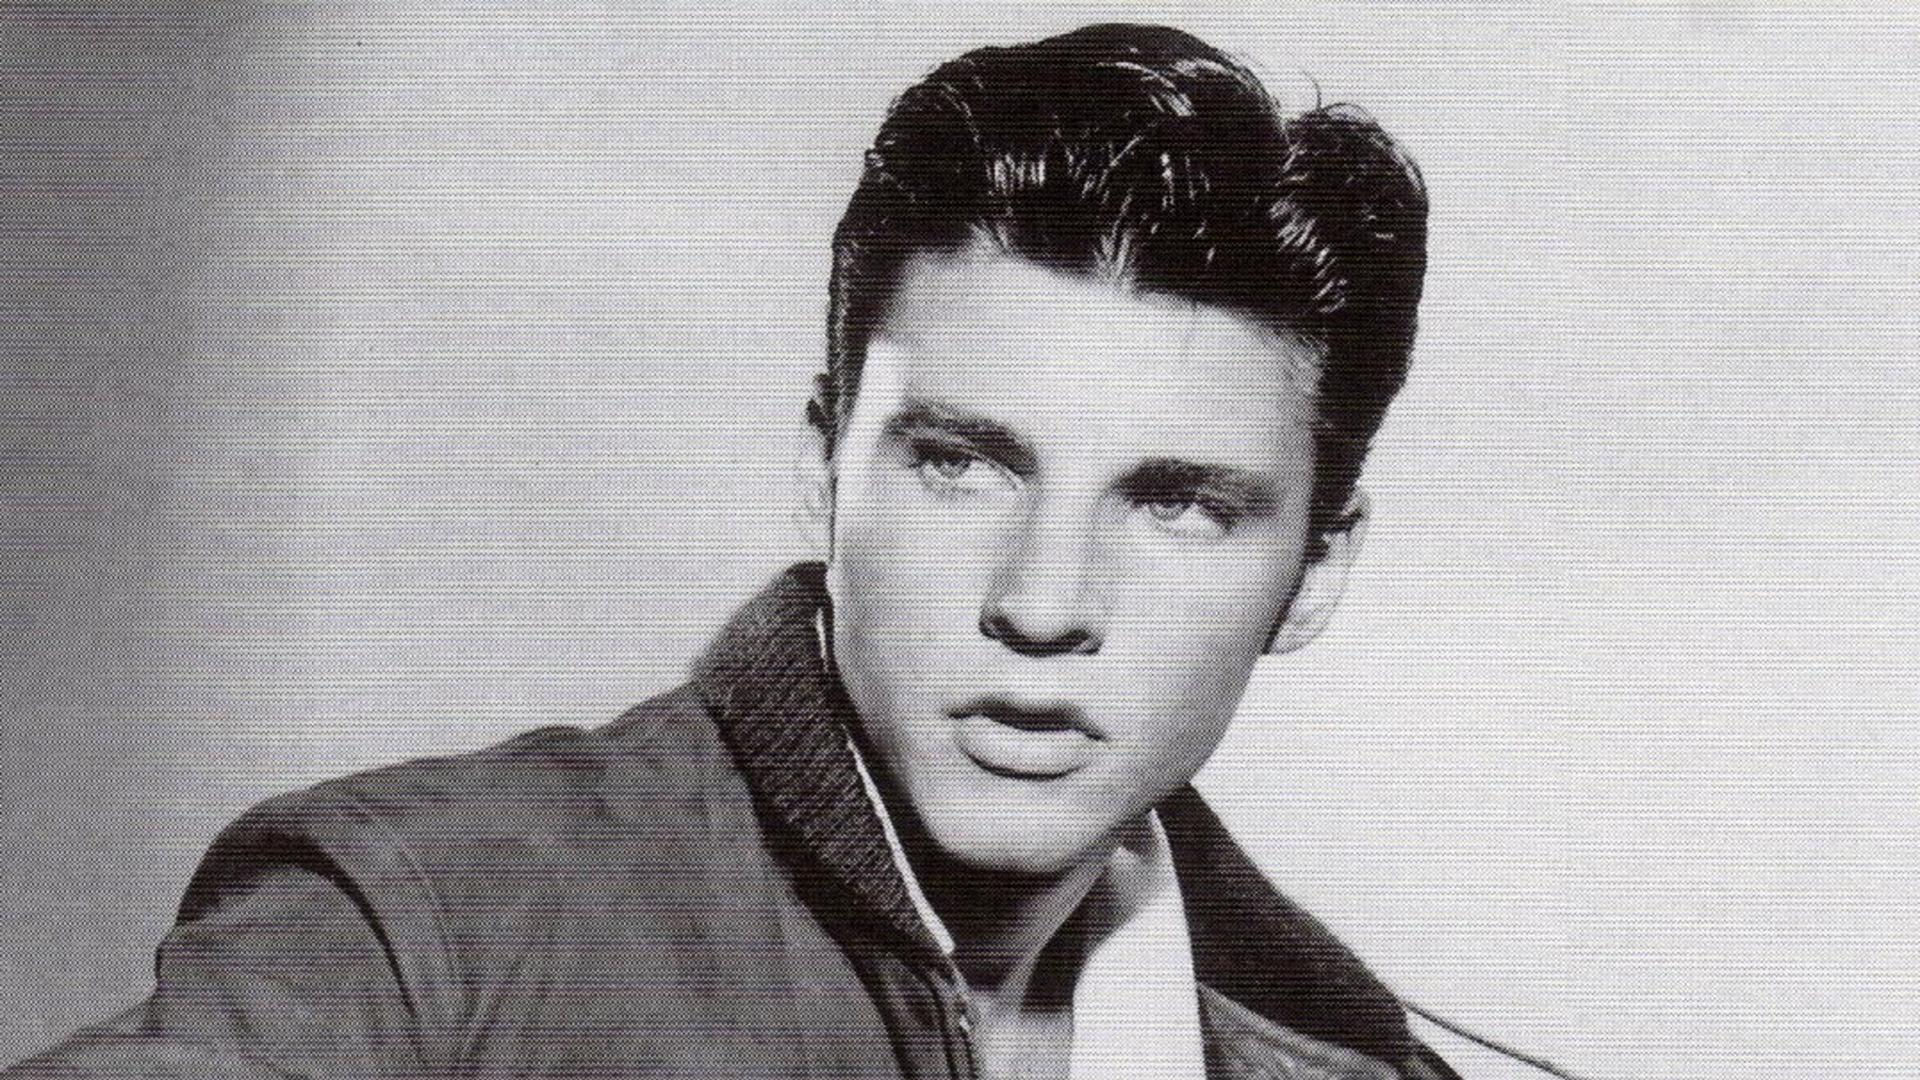 Ricky Nelson. Rock & Roll Hall of Fame